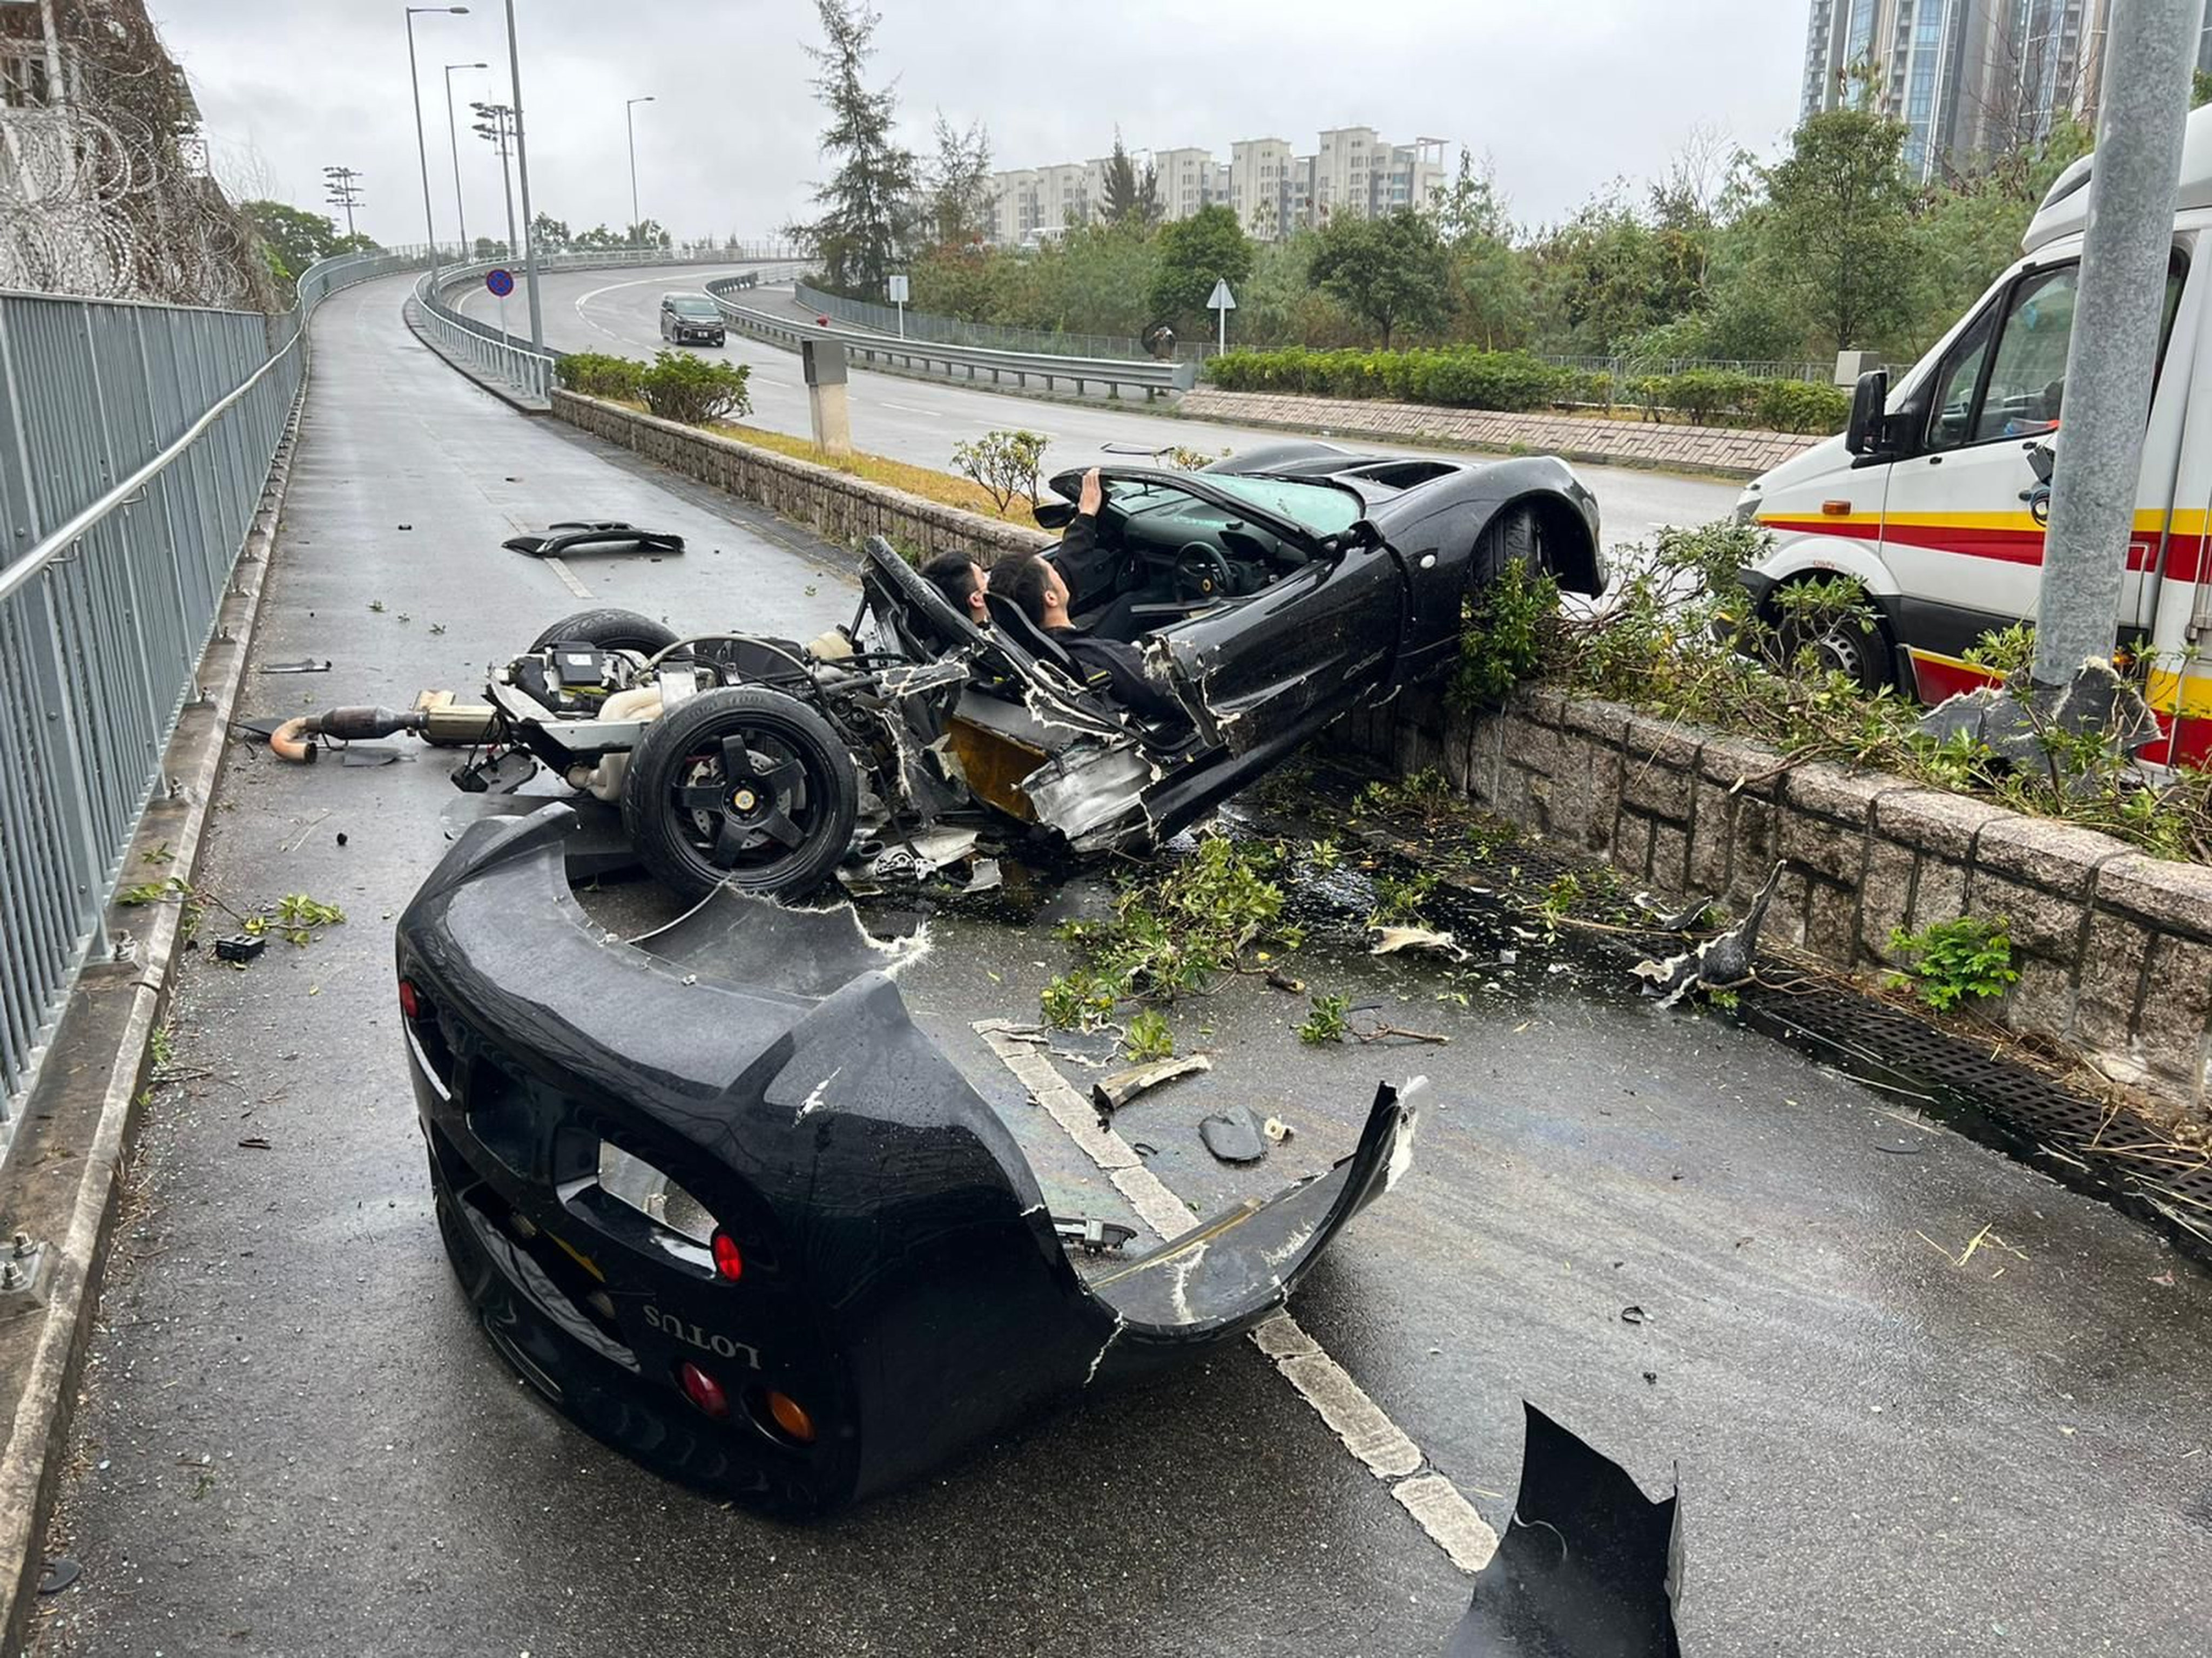 Hong Kong Driver And Passenger Narrowly Avoid Death As Airborne Black Lotus Exige Slams Into Lamp Post And Splits Nearly In Half South China Morning Post